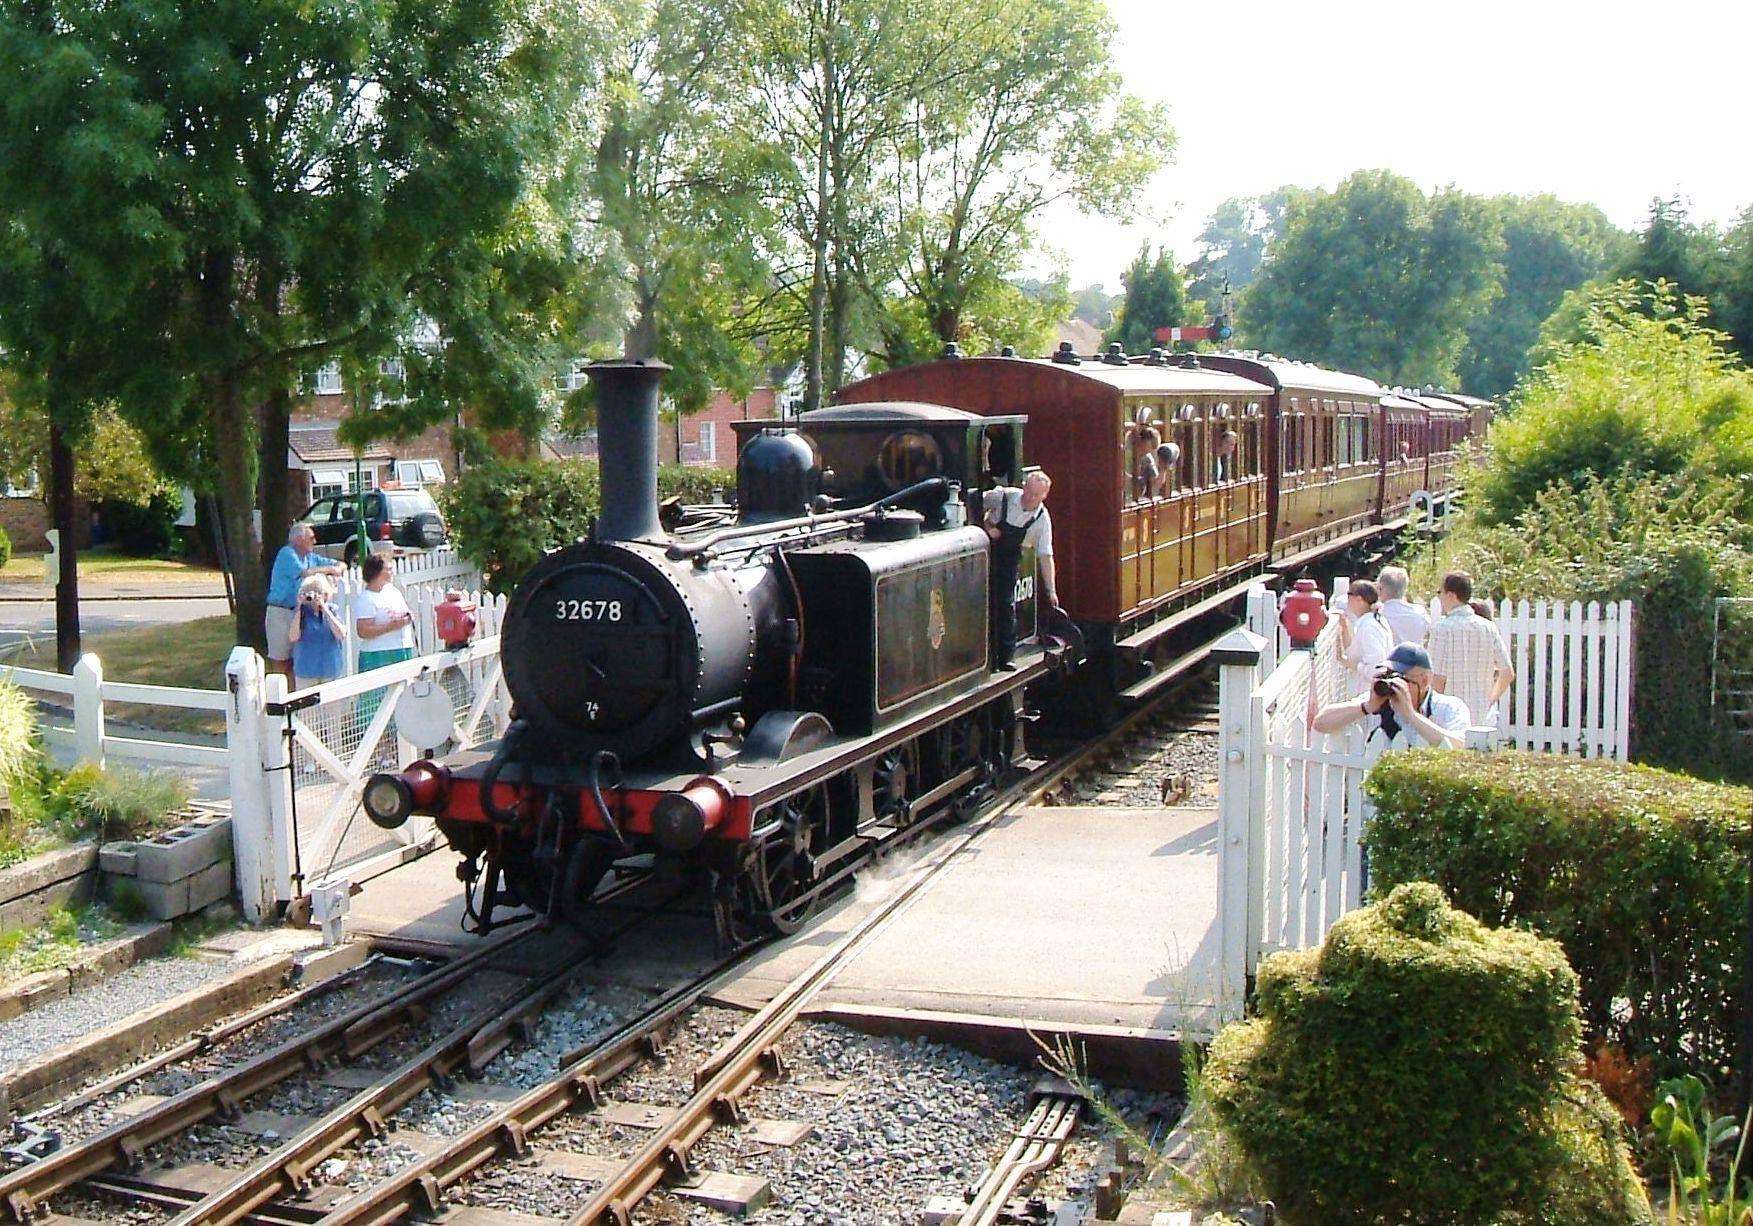 Climb aboard the railway this weekend